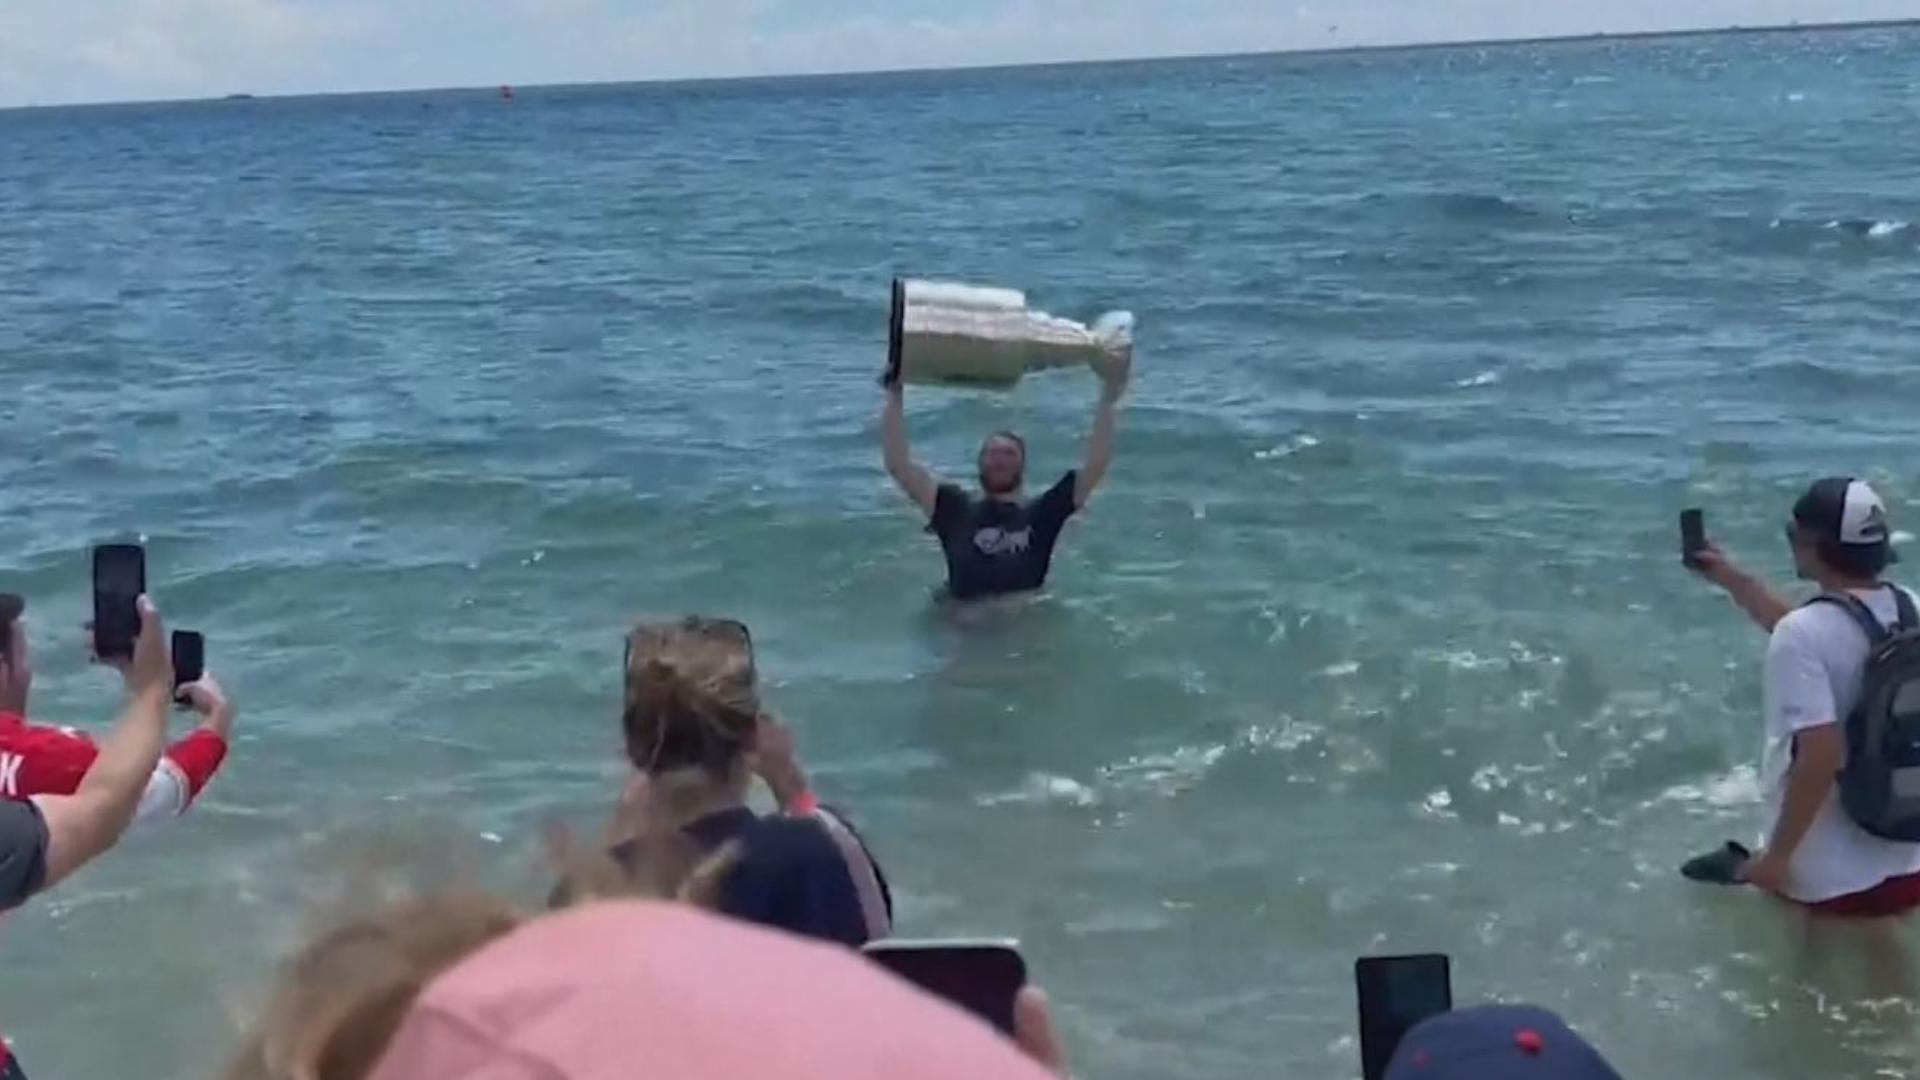 Florida Panthers star Matthew Tkachuk took a dip in the Atlantic Ocean with the Stanley Cup Tuesday. The team won its first championship on Monday. (WTVJ)